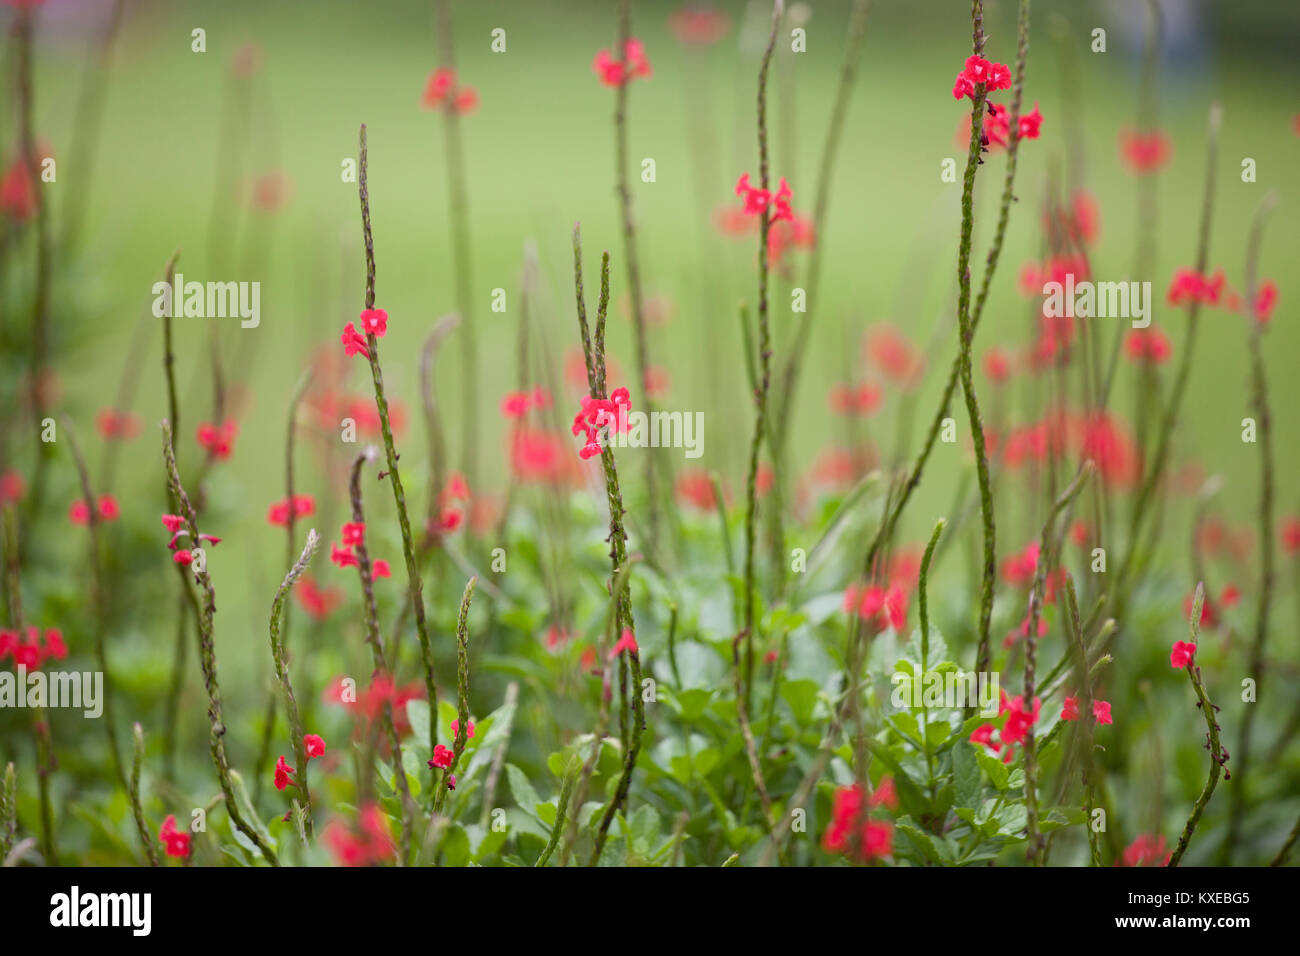 Small red flowers on long stems in a field with short depth of field. Stock Photo